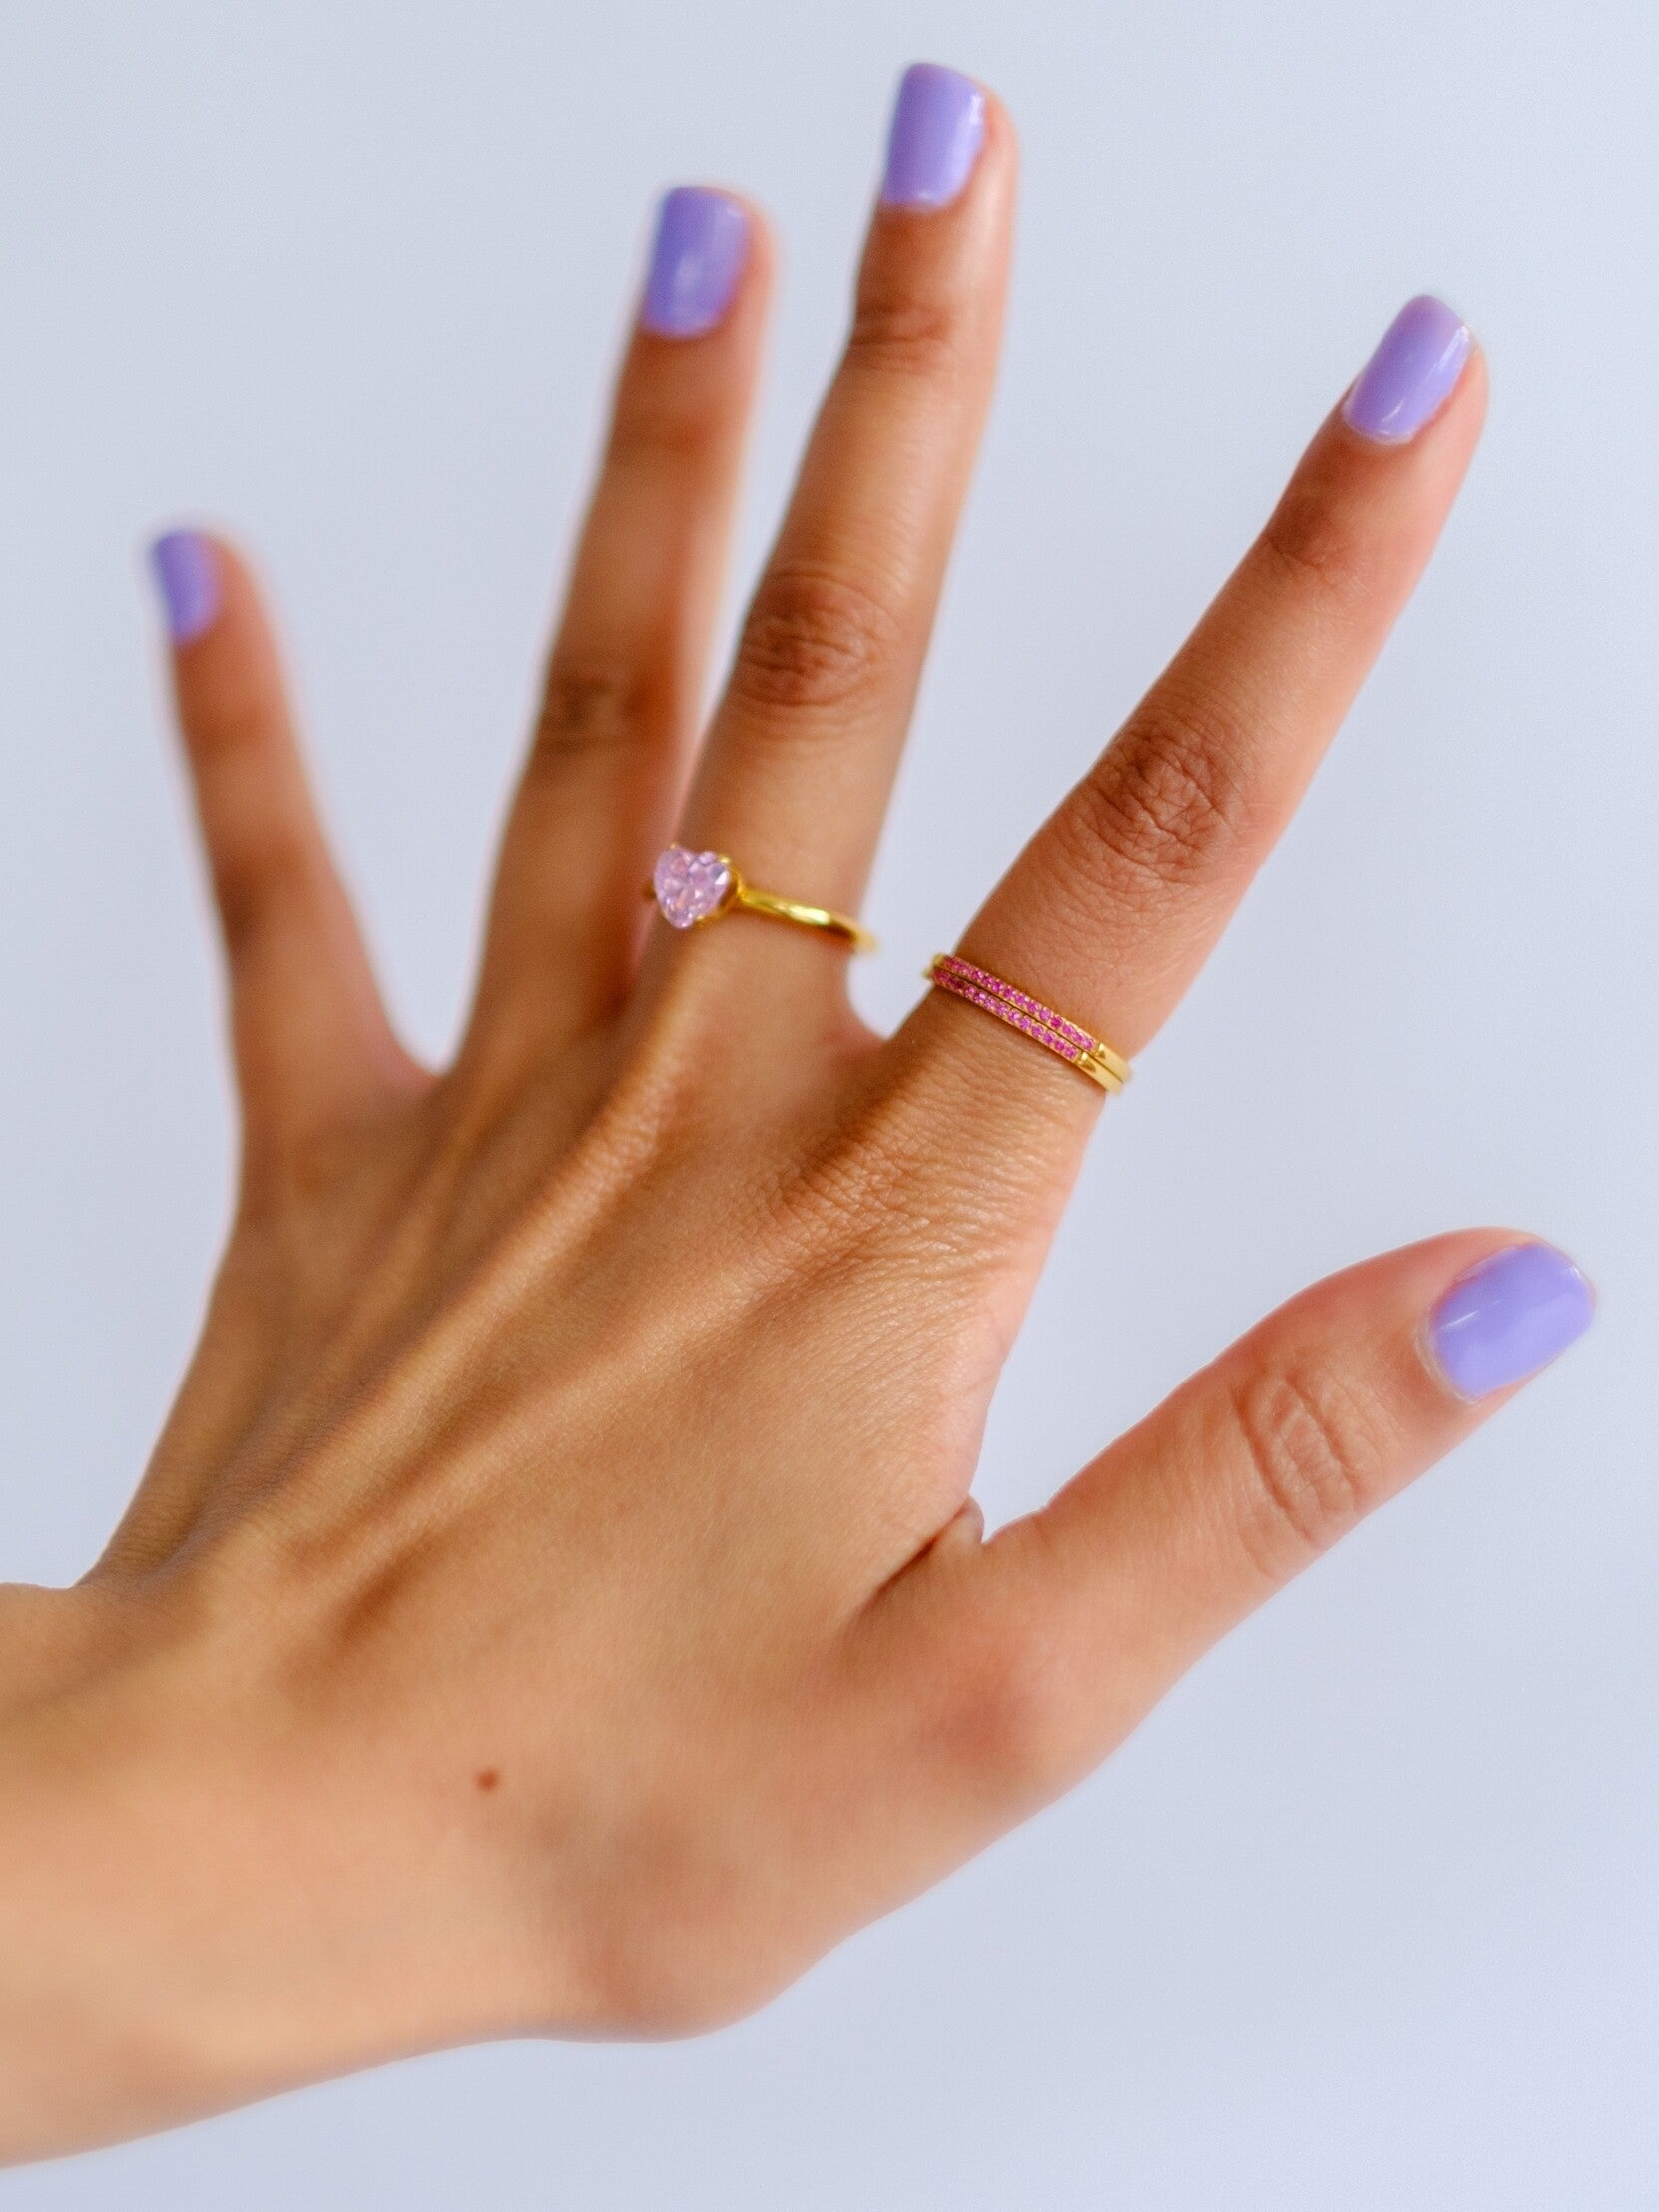 Woman's hand wearing three gold rings in two different styles, set with pink stones